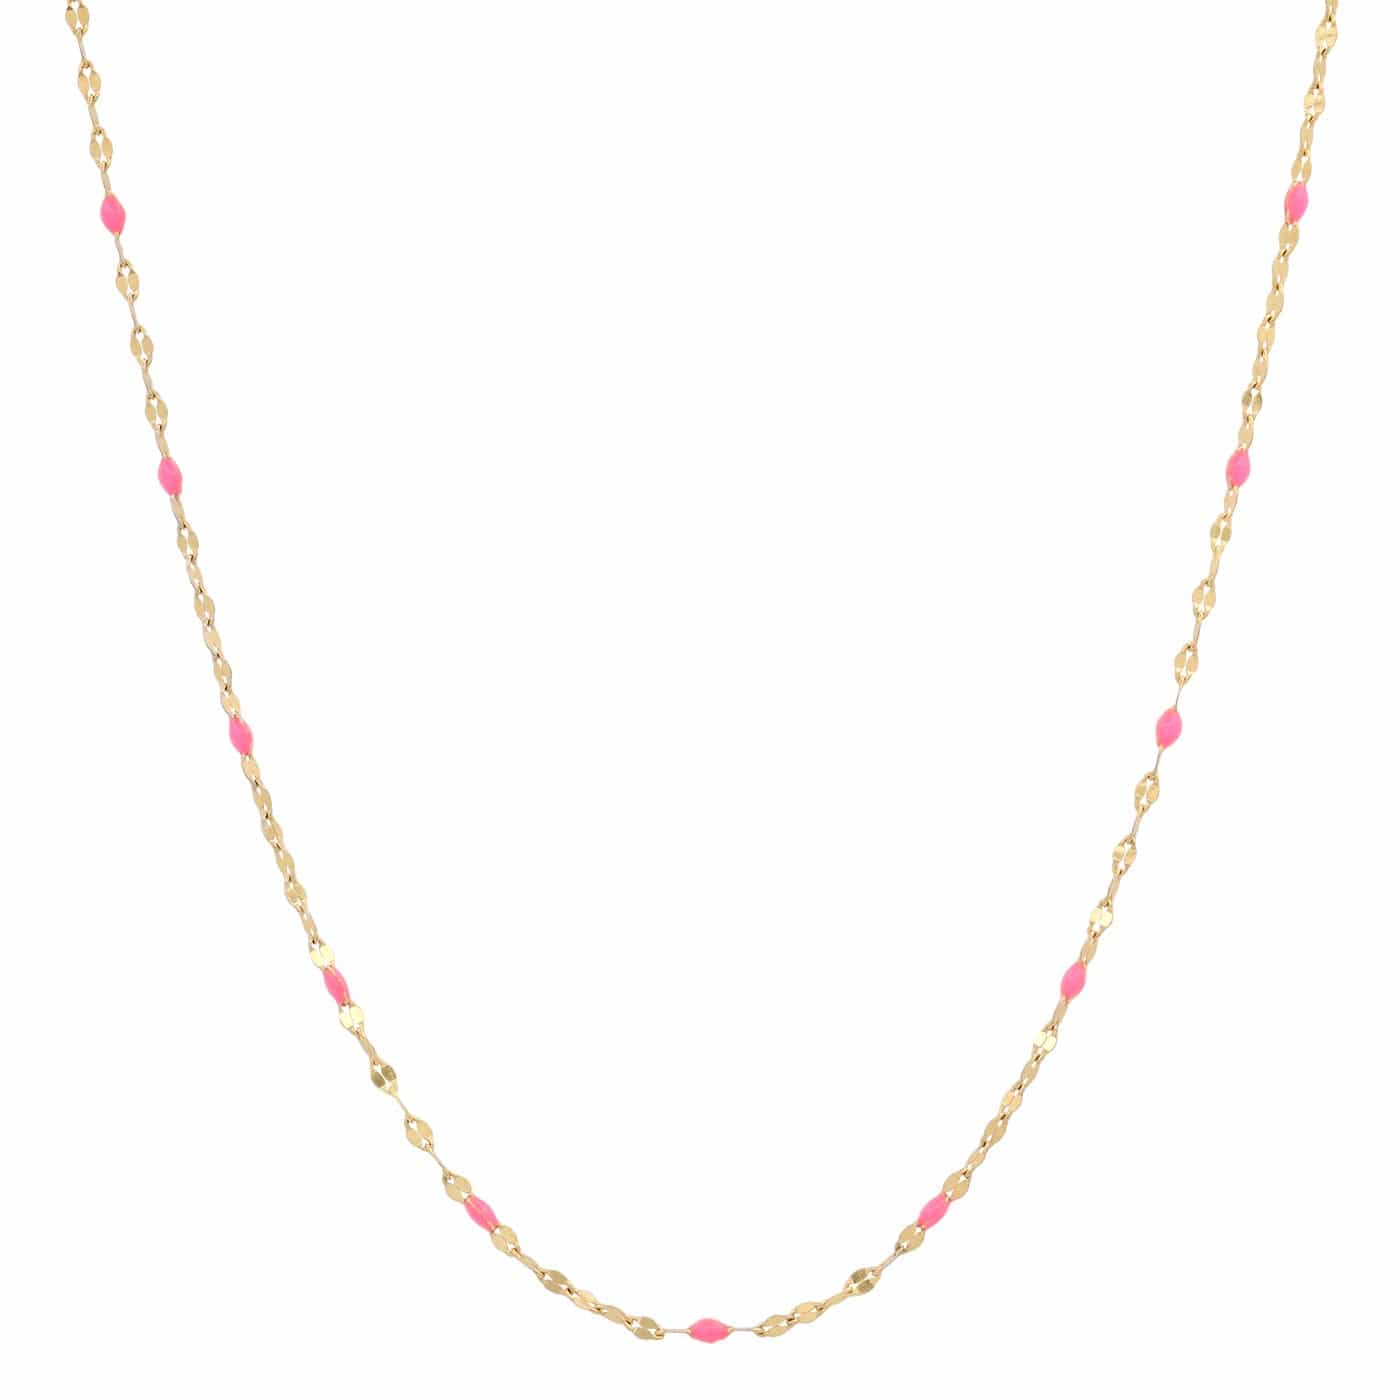 TAI JEWELRY Necklace Gold/Neon Pink Gold Vermeil Sparkle Chain with Enamel Stations